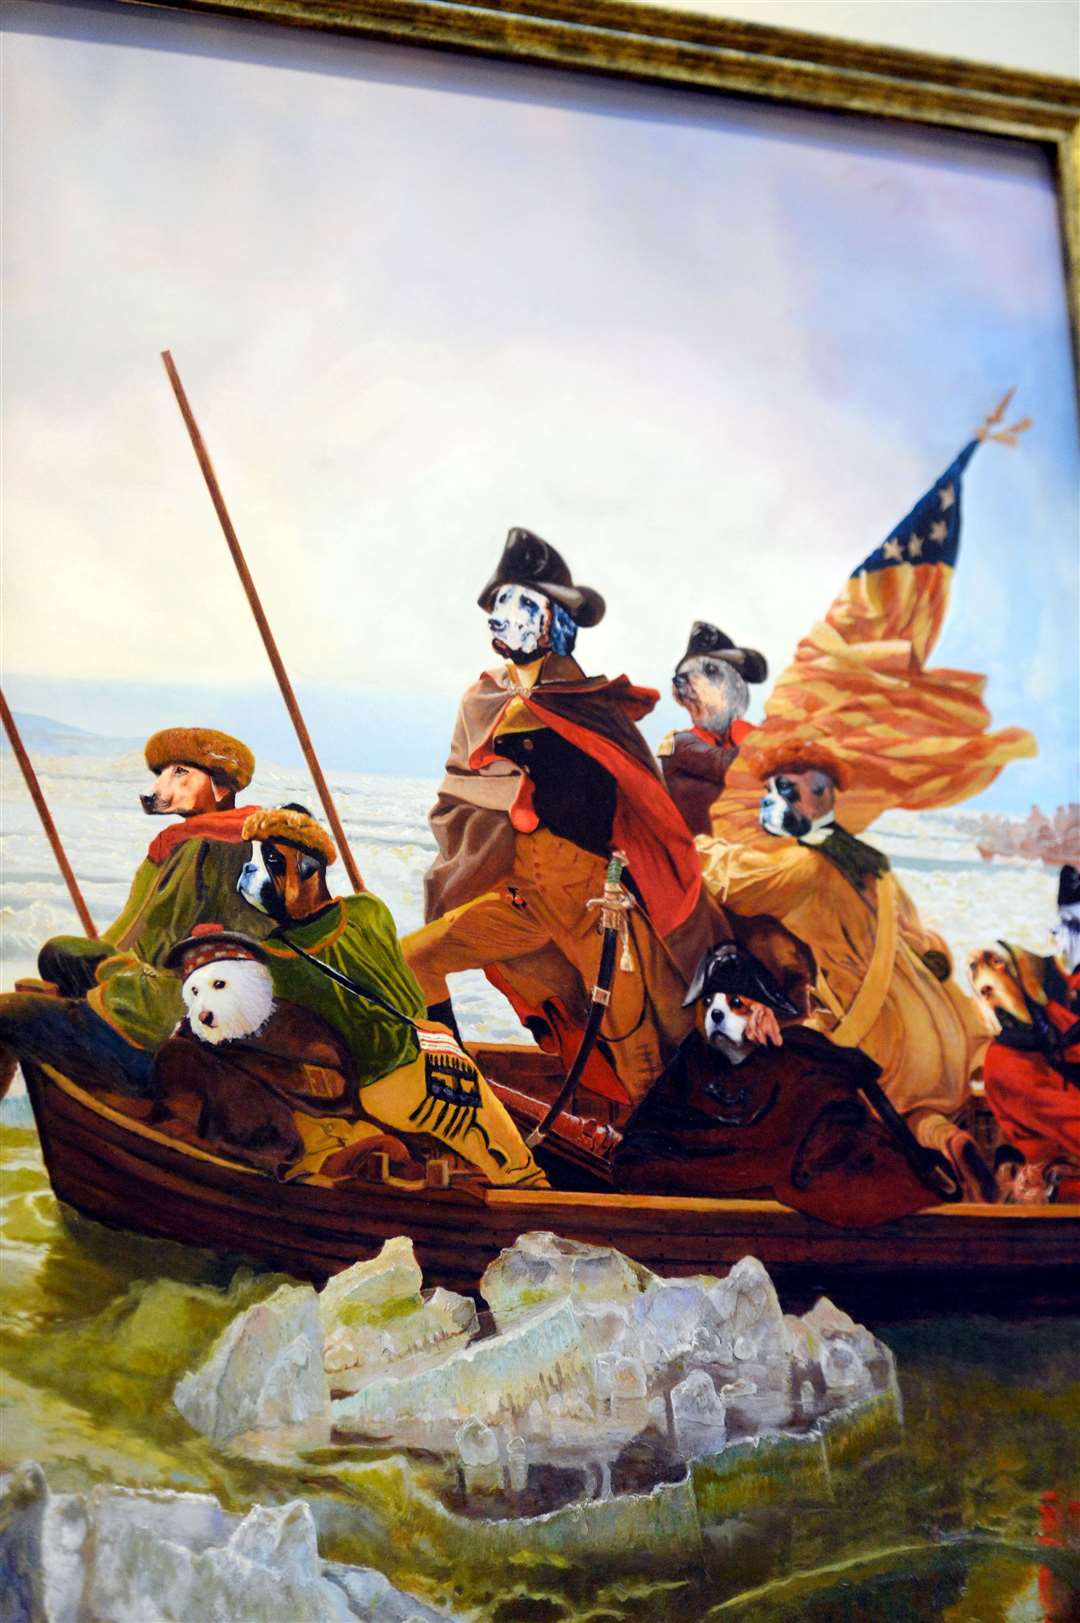 David Fallow is known for paintings substituting dogs for people as in his version of Washington Crossing the Delaware. Picture: Gary Anthony